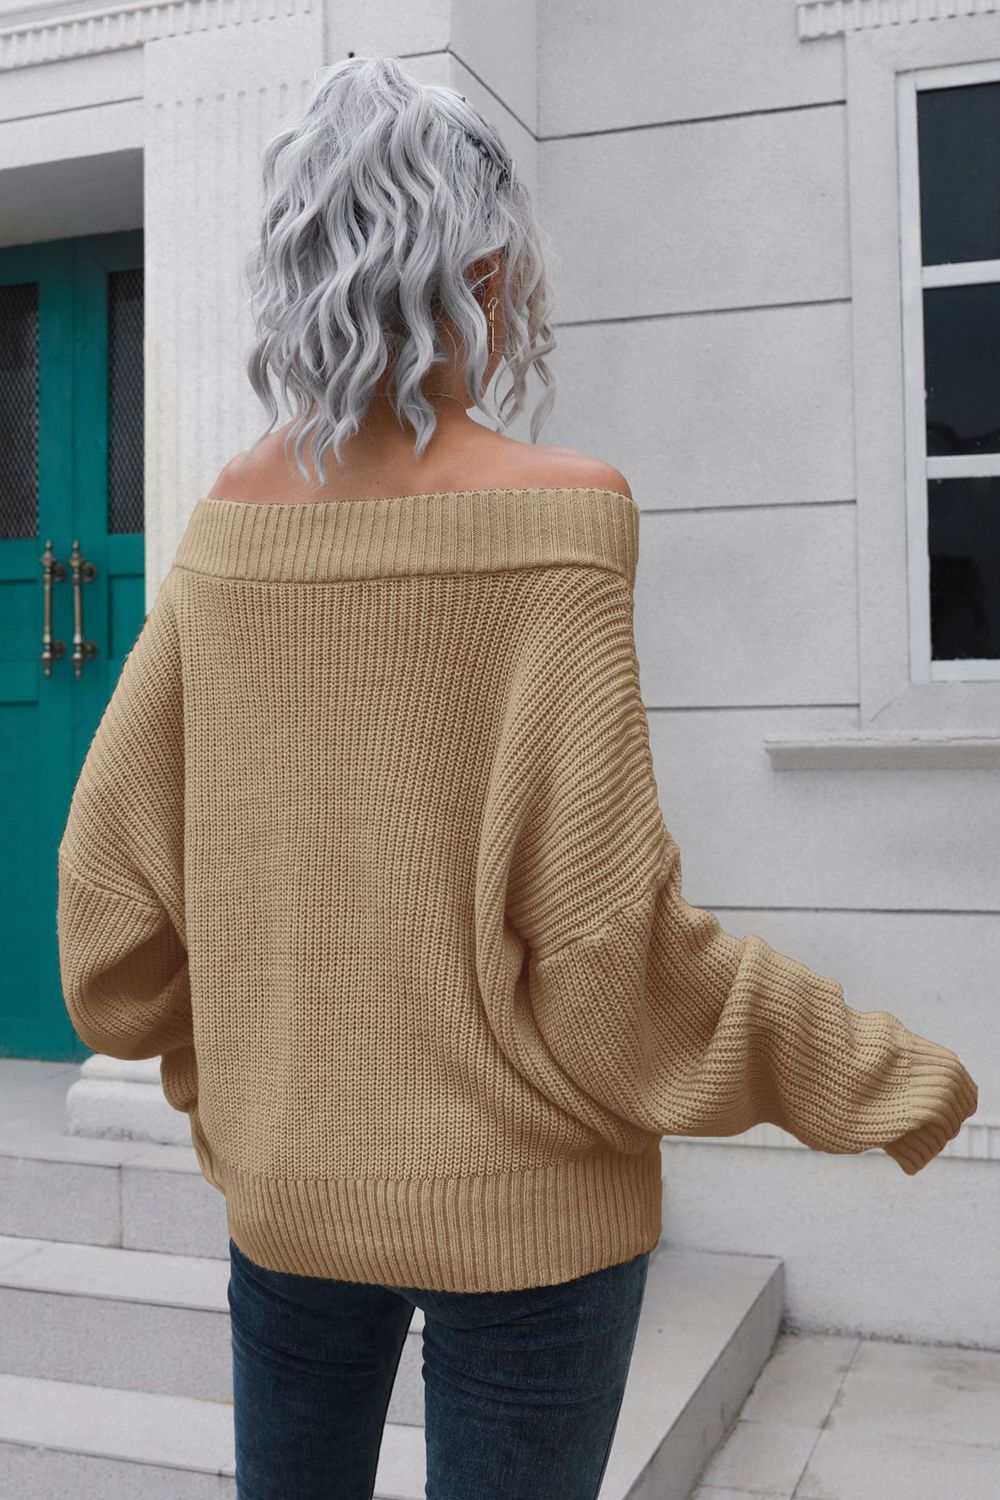 Off-Shoulder Ribbed Long Sleeve Pullover Sweater - Fashion Girl Online Store